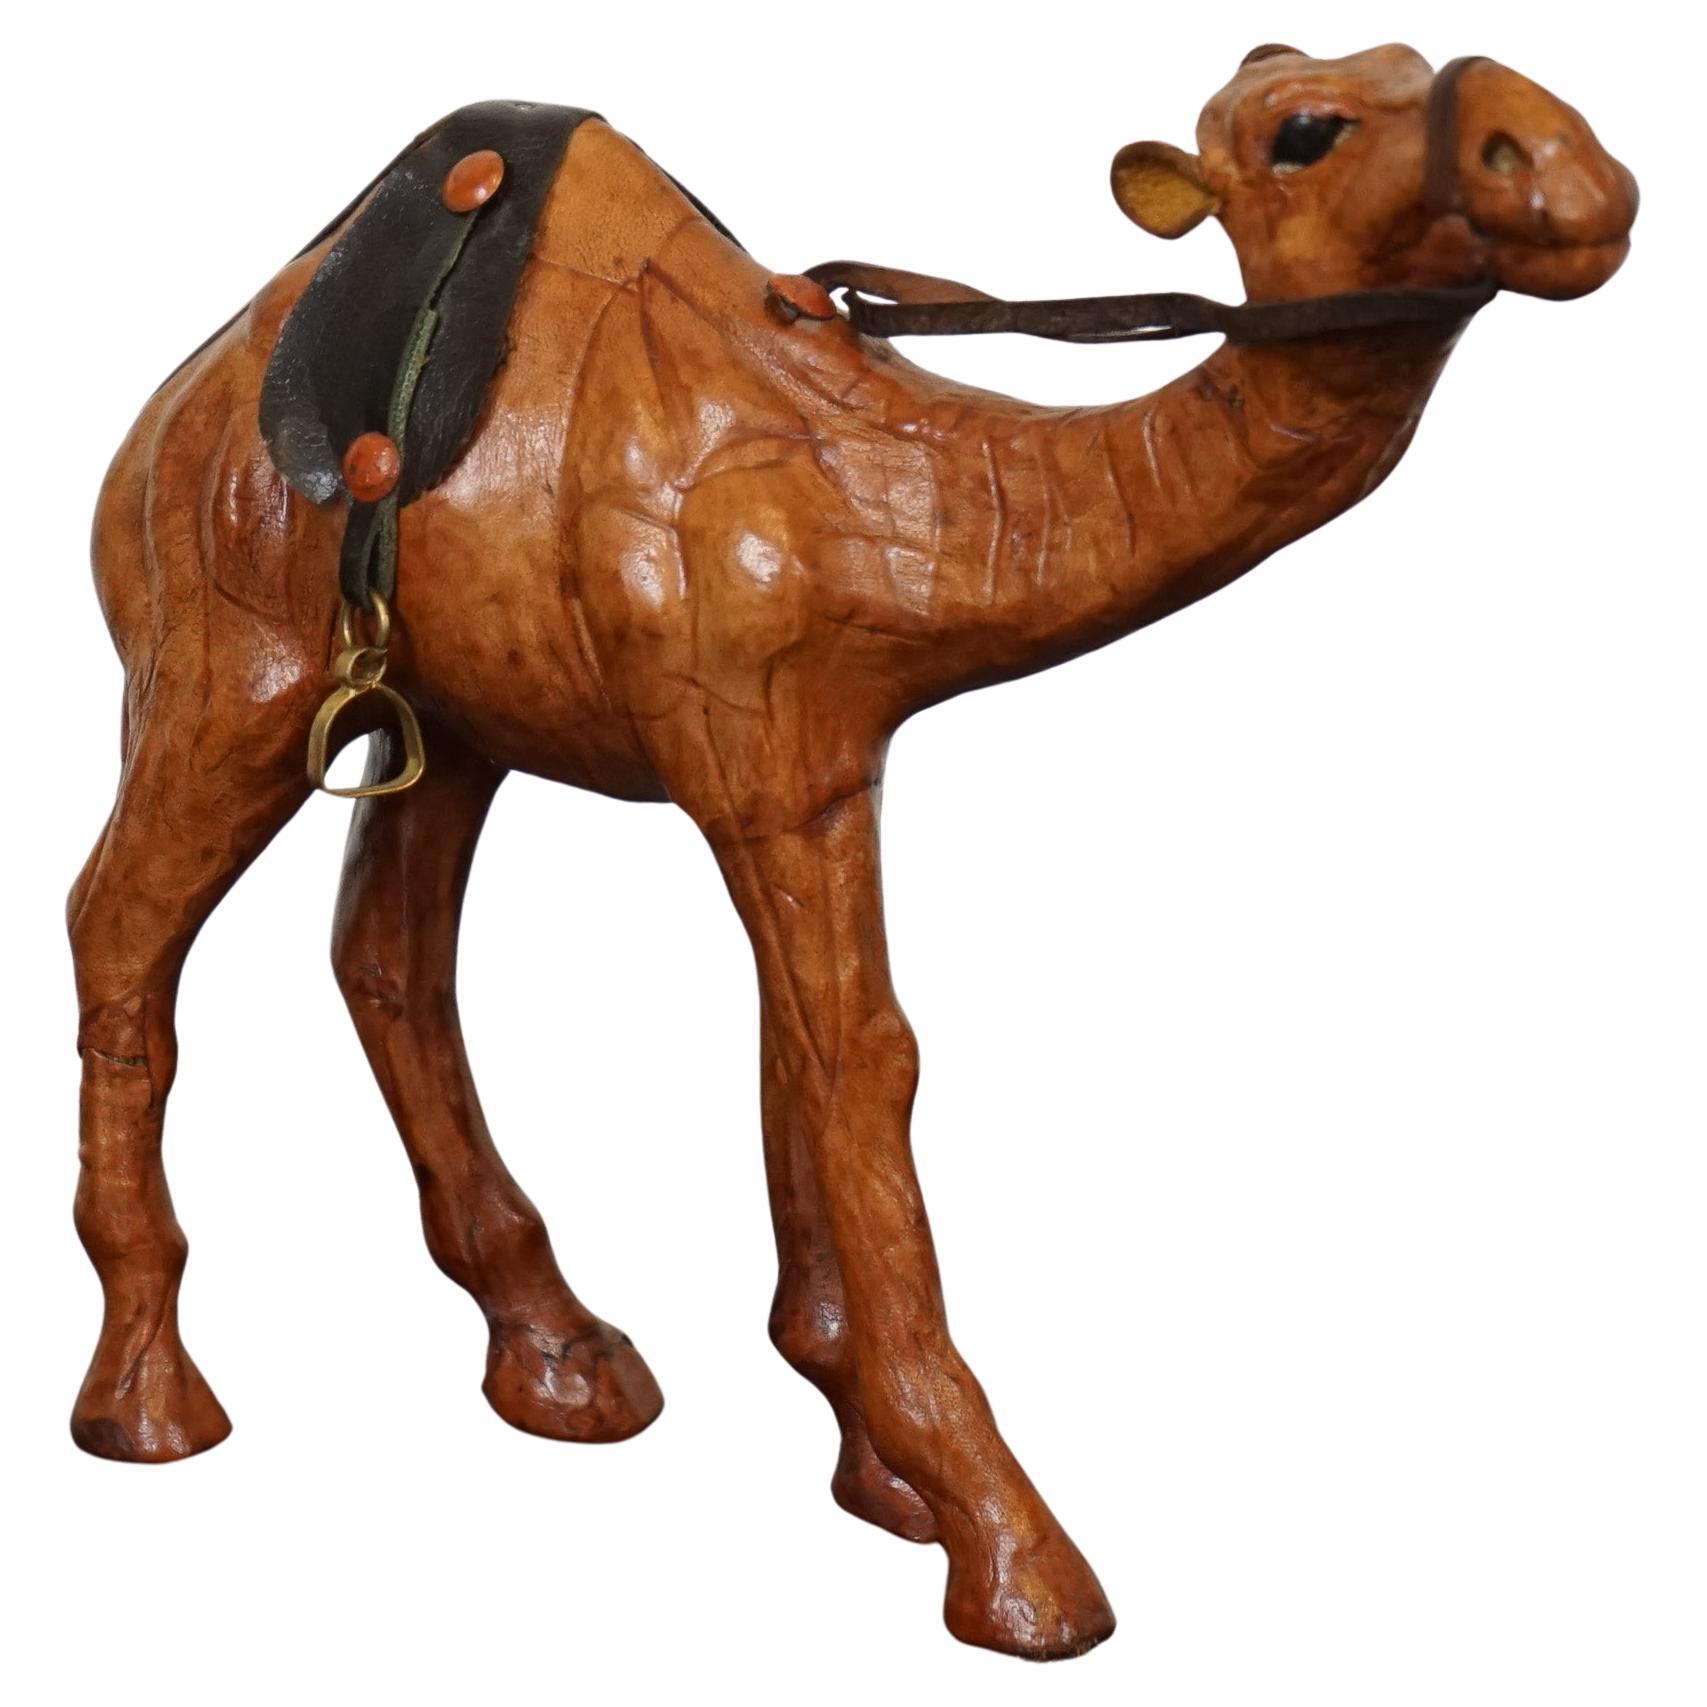 LIBERTY'S LONDON CAMEL SculPTURE WiTH LOVELY AGED LEATHER ON HAND CARved WOOD  im Angebot